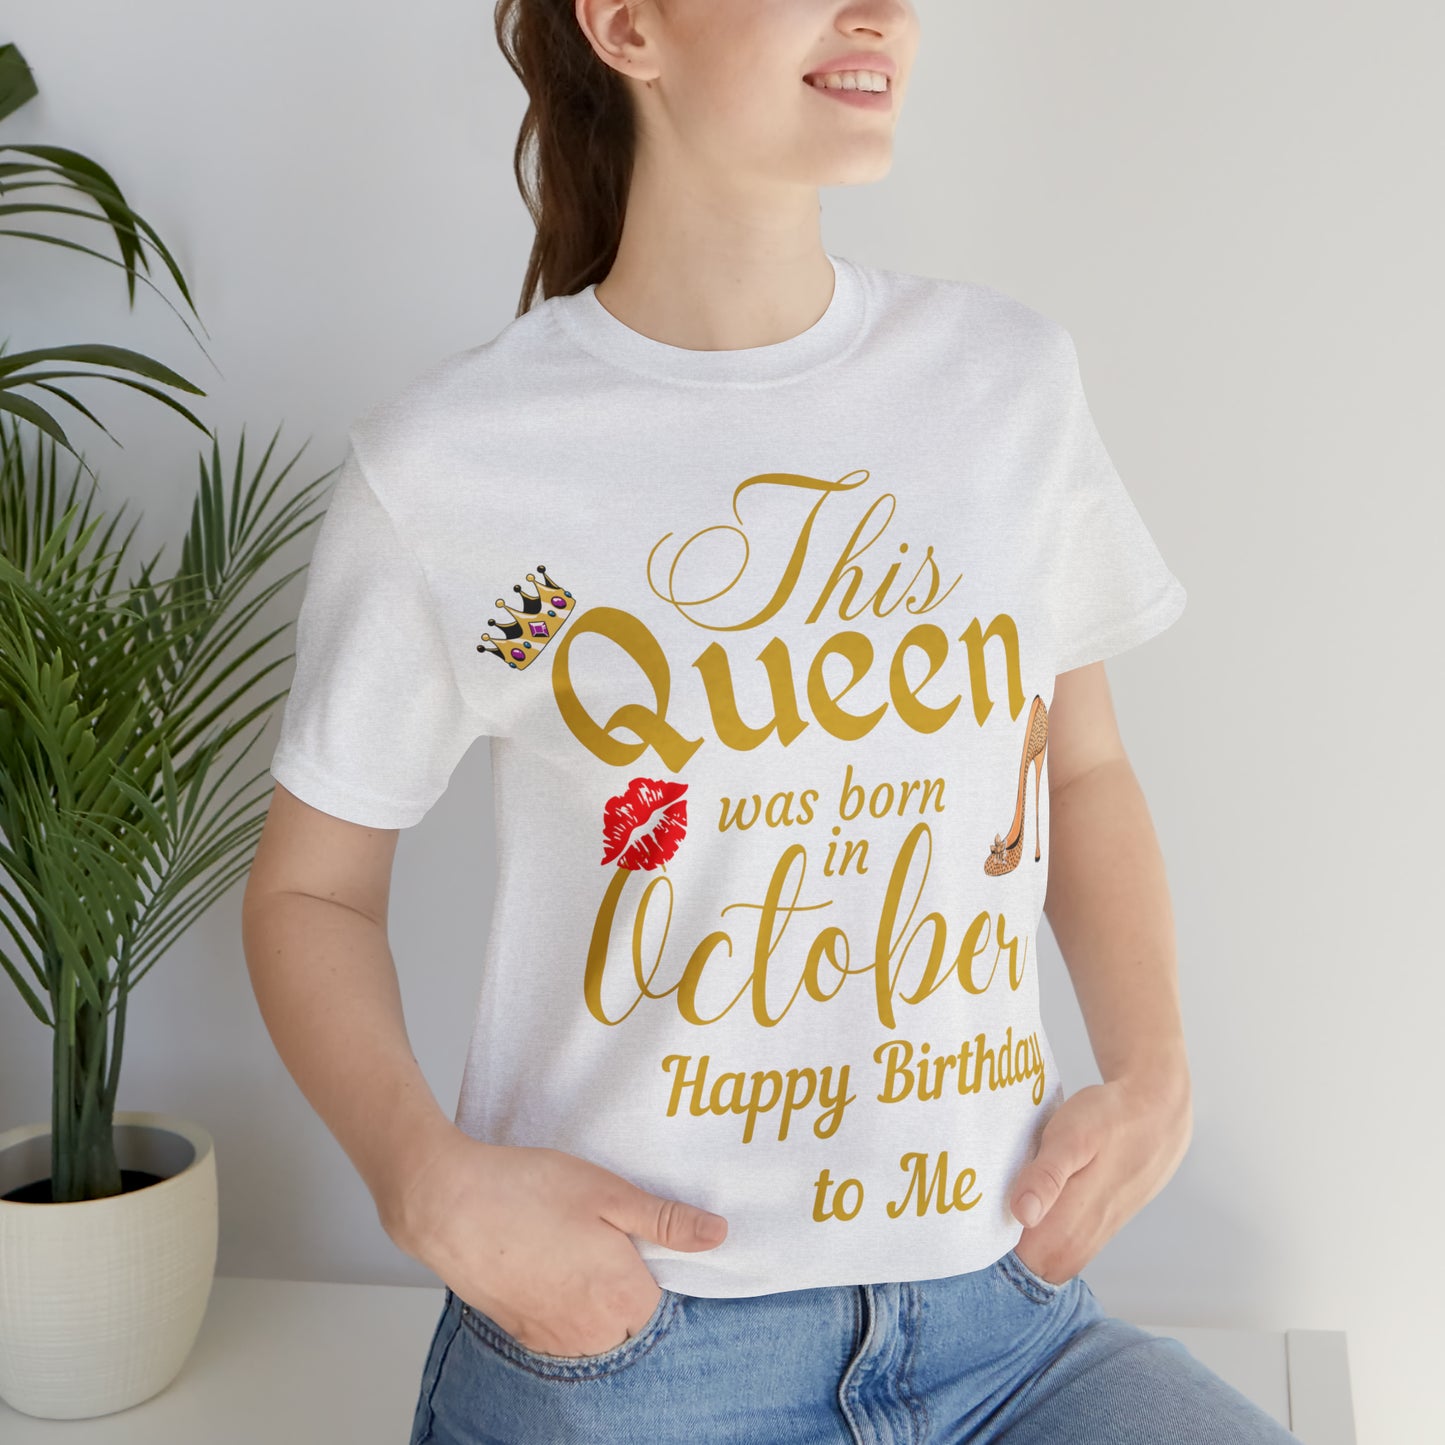 Birthday Queen Shirt, Gift for Birthday, This Queen was born in October Shirt, Funny Queen Shirt, Funny Birthday Shirt, Birthday Gift